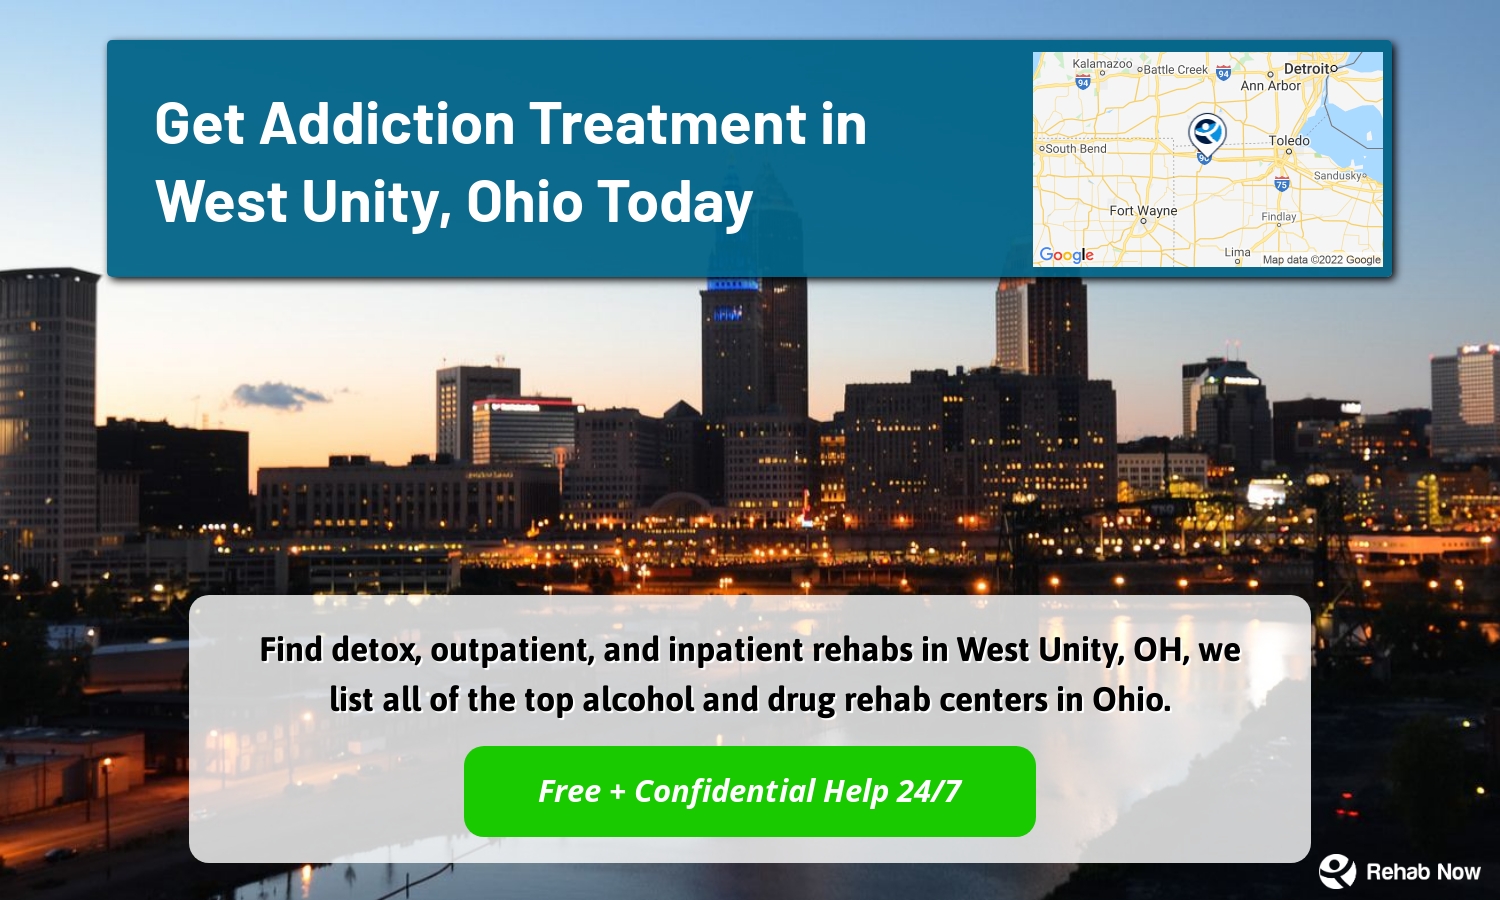 Find detox, outpatient, and inpatient rehabs in West Unity, OH, we list all of the top alcohol and drug rehab centers in Ohio.